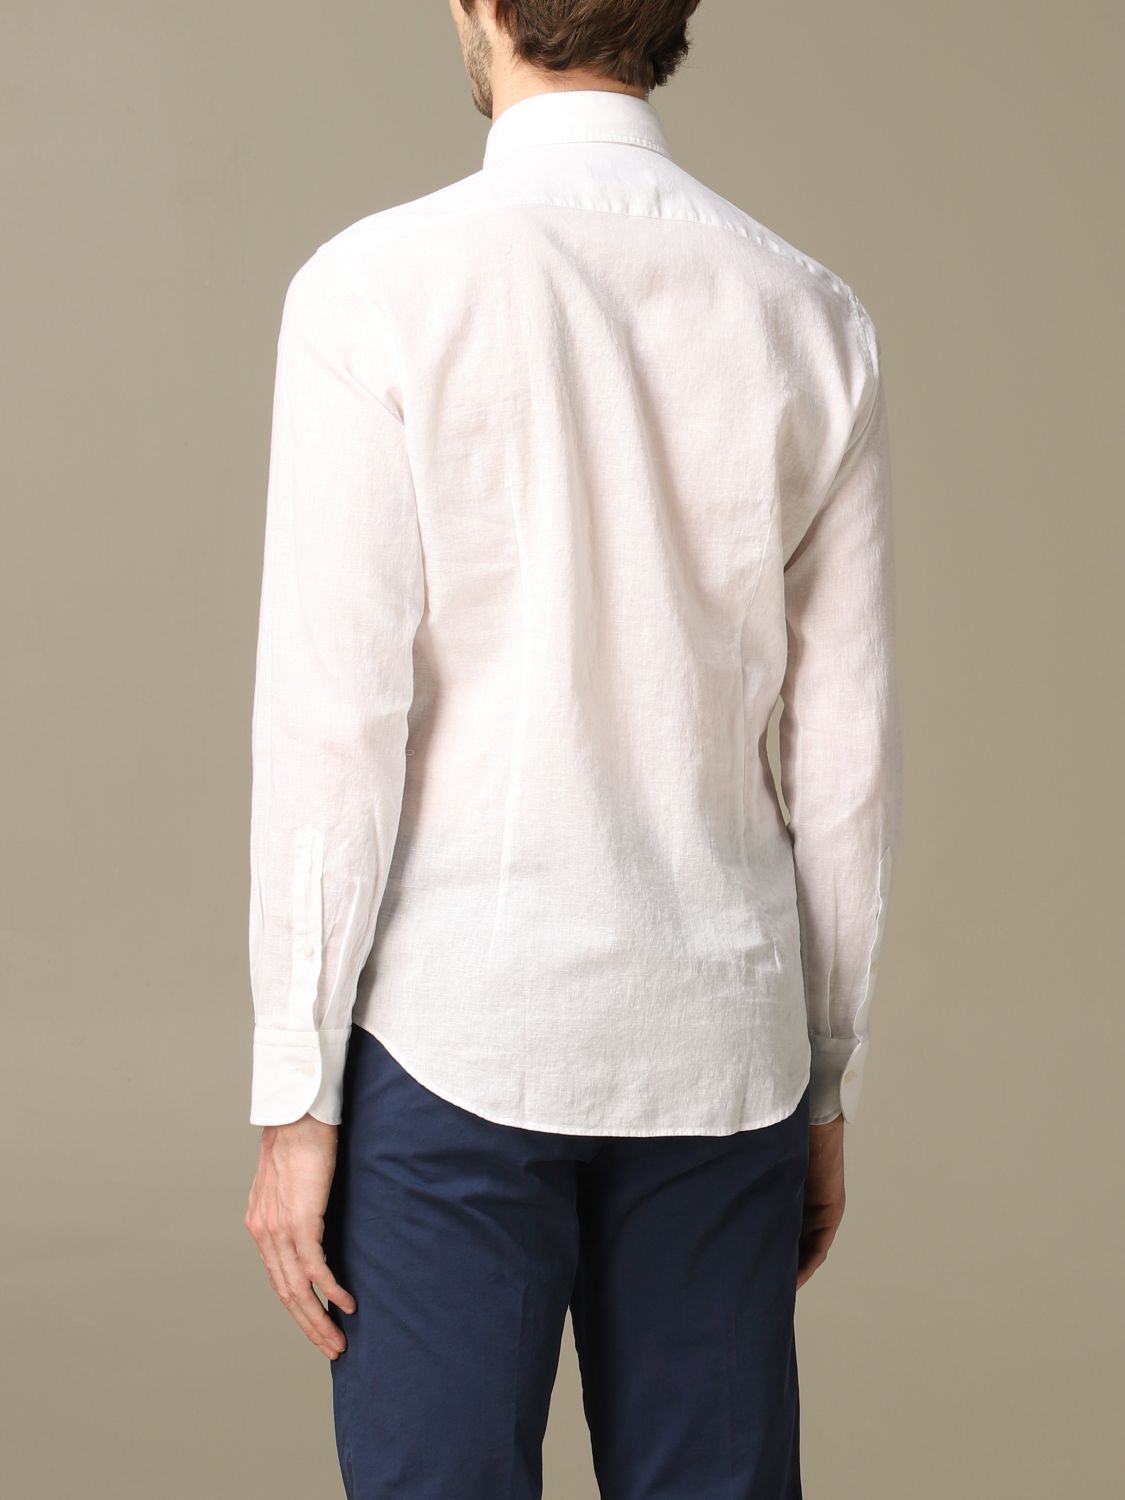 Xc Outlet: linen shirt with button down collar - White | Shirt Xc DP3L